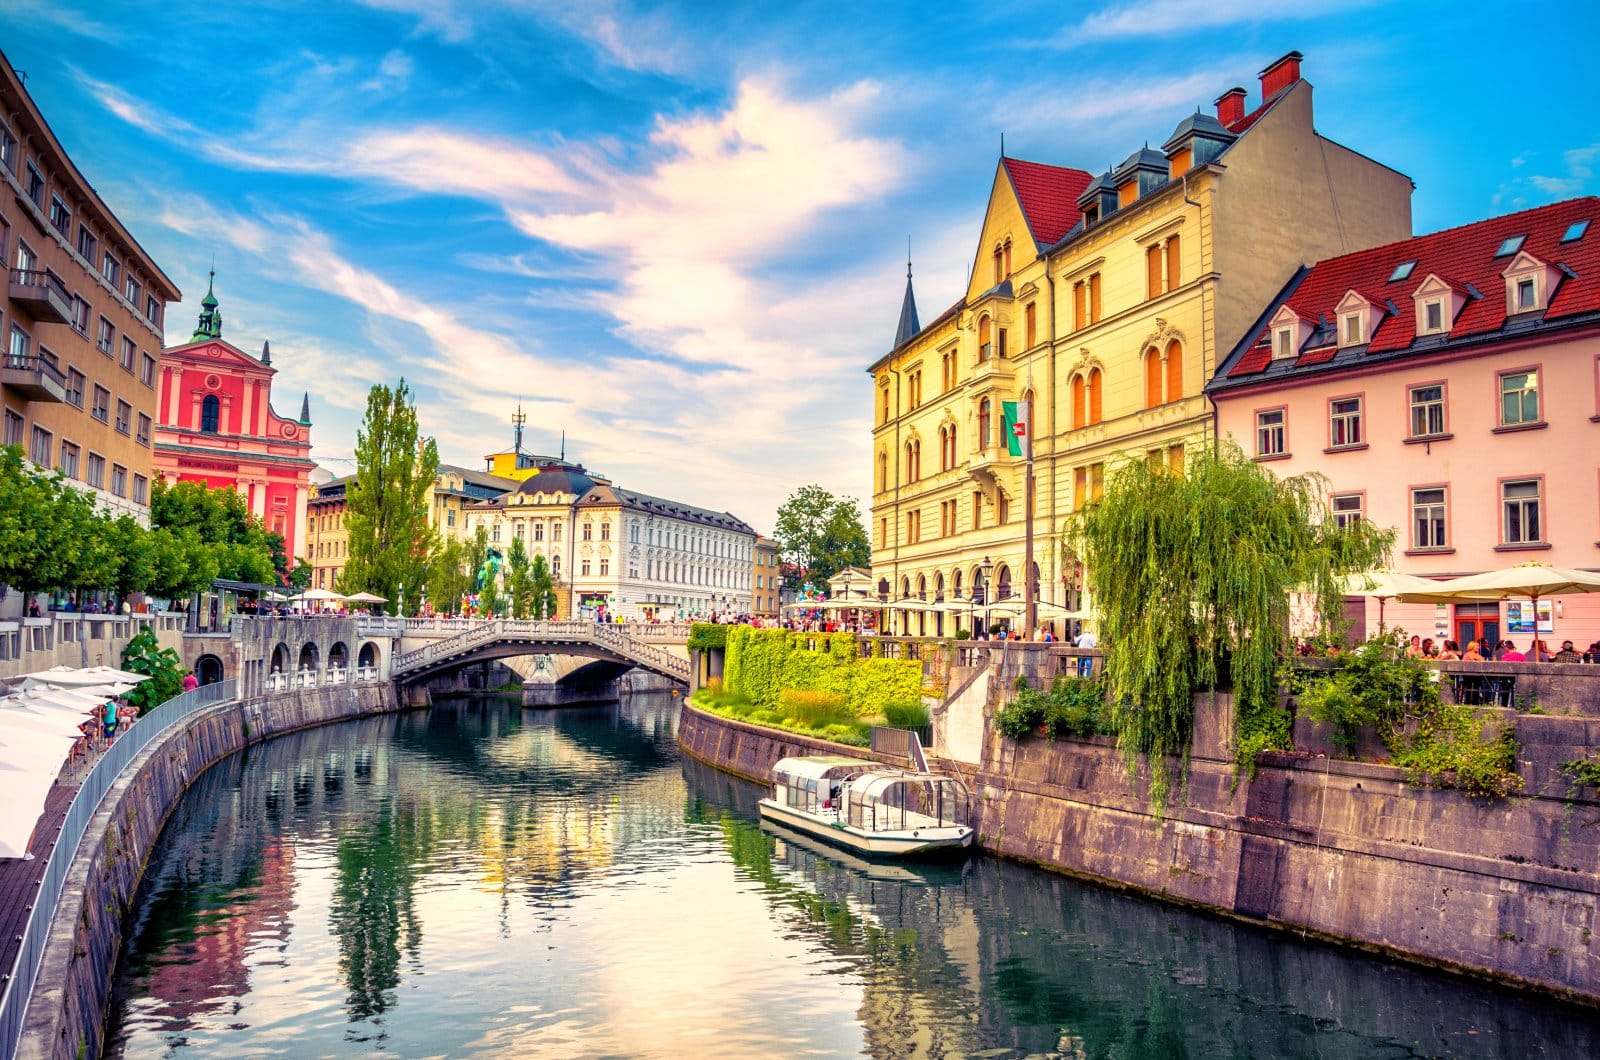 <p class="wp-caption-text">Image Credit: Shutterstock / Georgios Tsichlis</p>  <p>Ljubljana is an affordable, green capital with free city tours, a lively street art scene, and inexpensive Slovenian cuisine.</p>